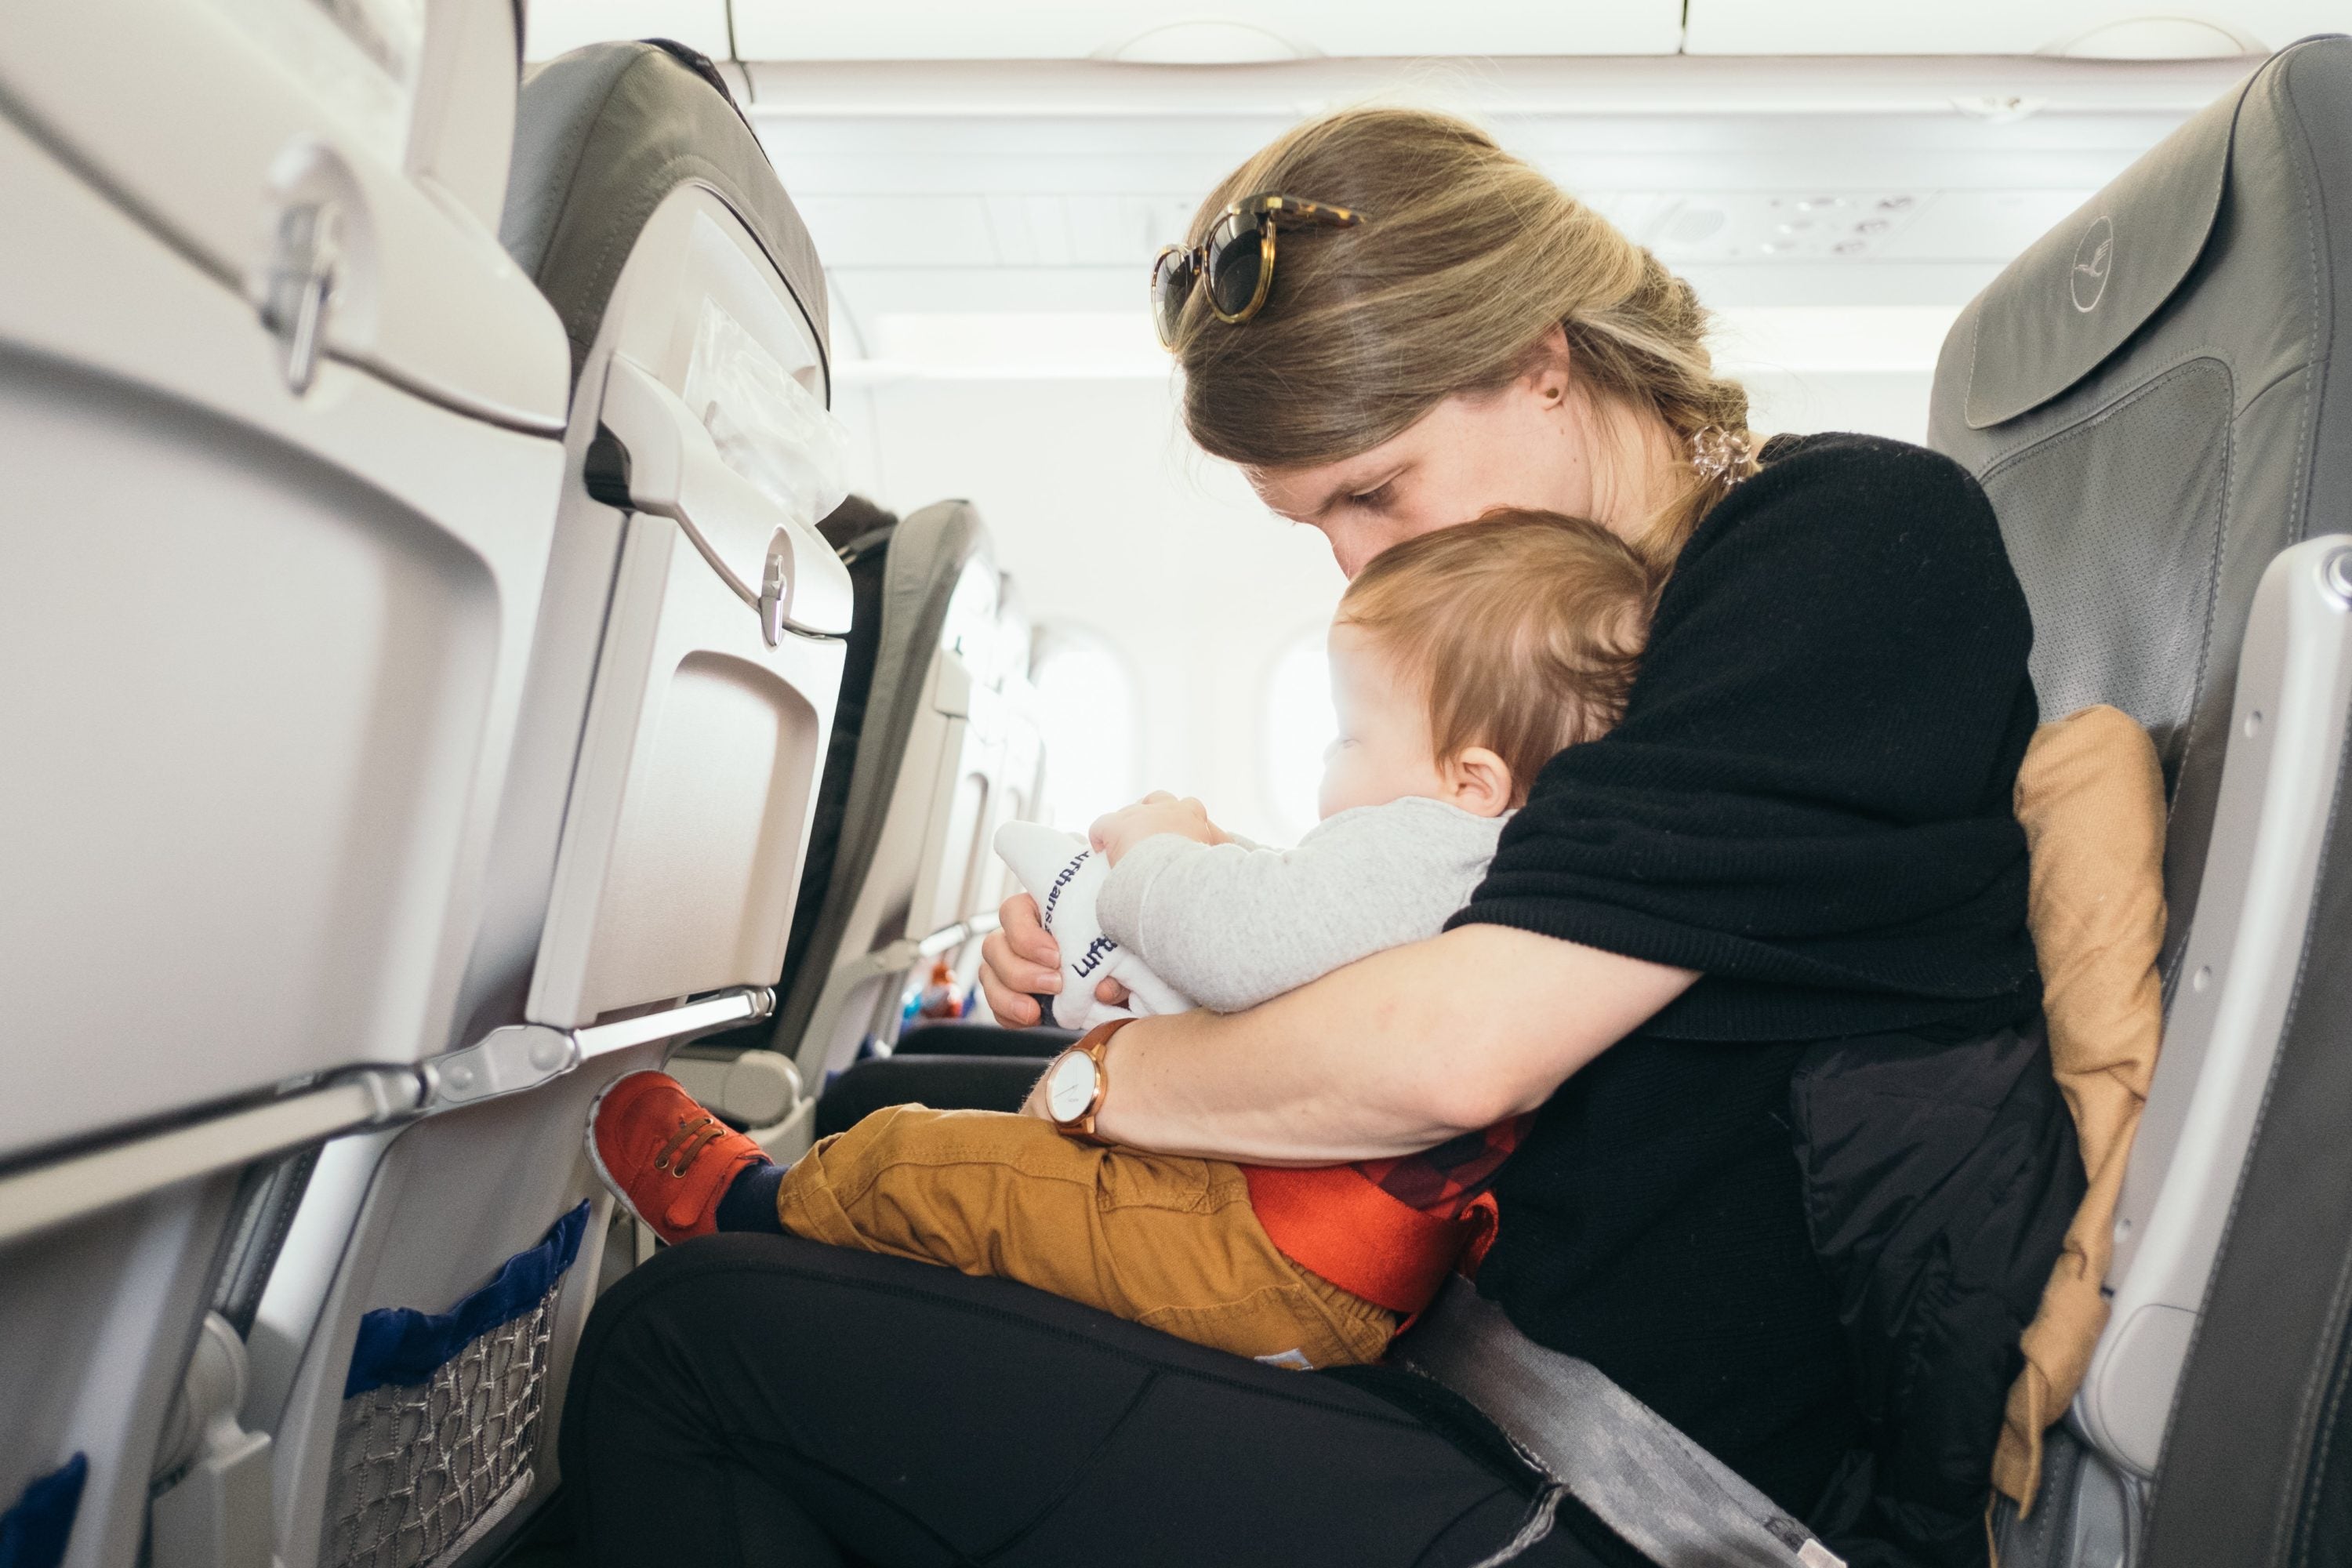 mother and child on airplane